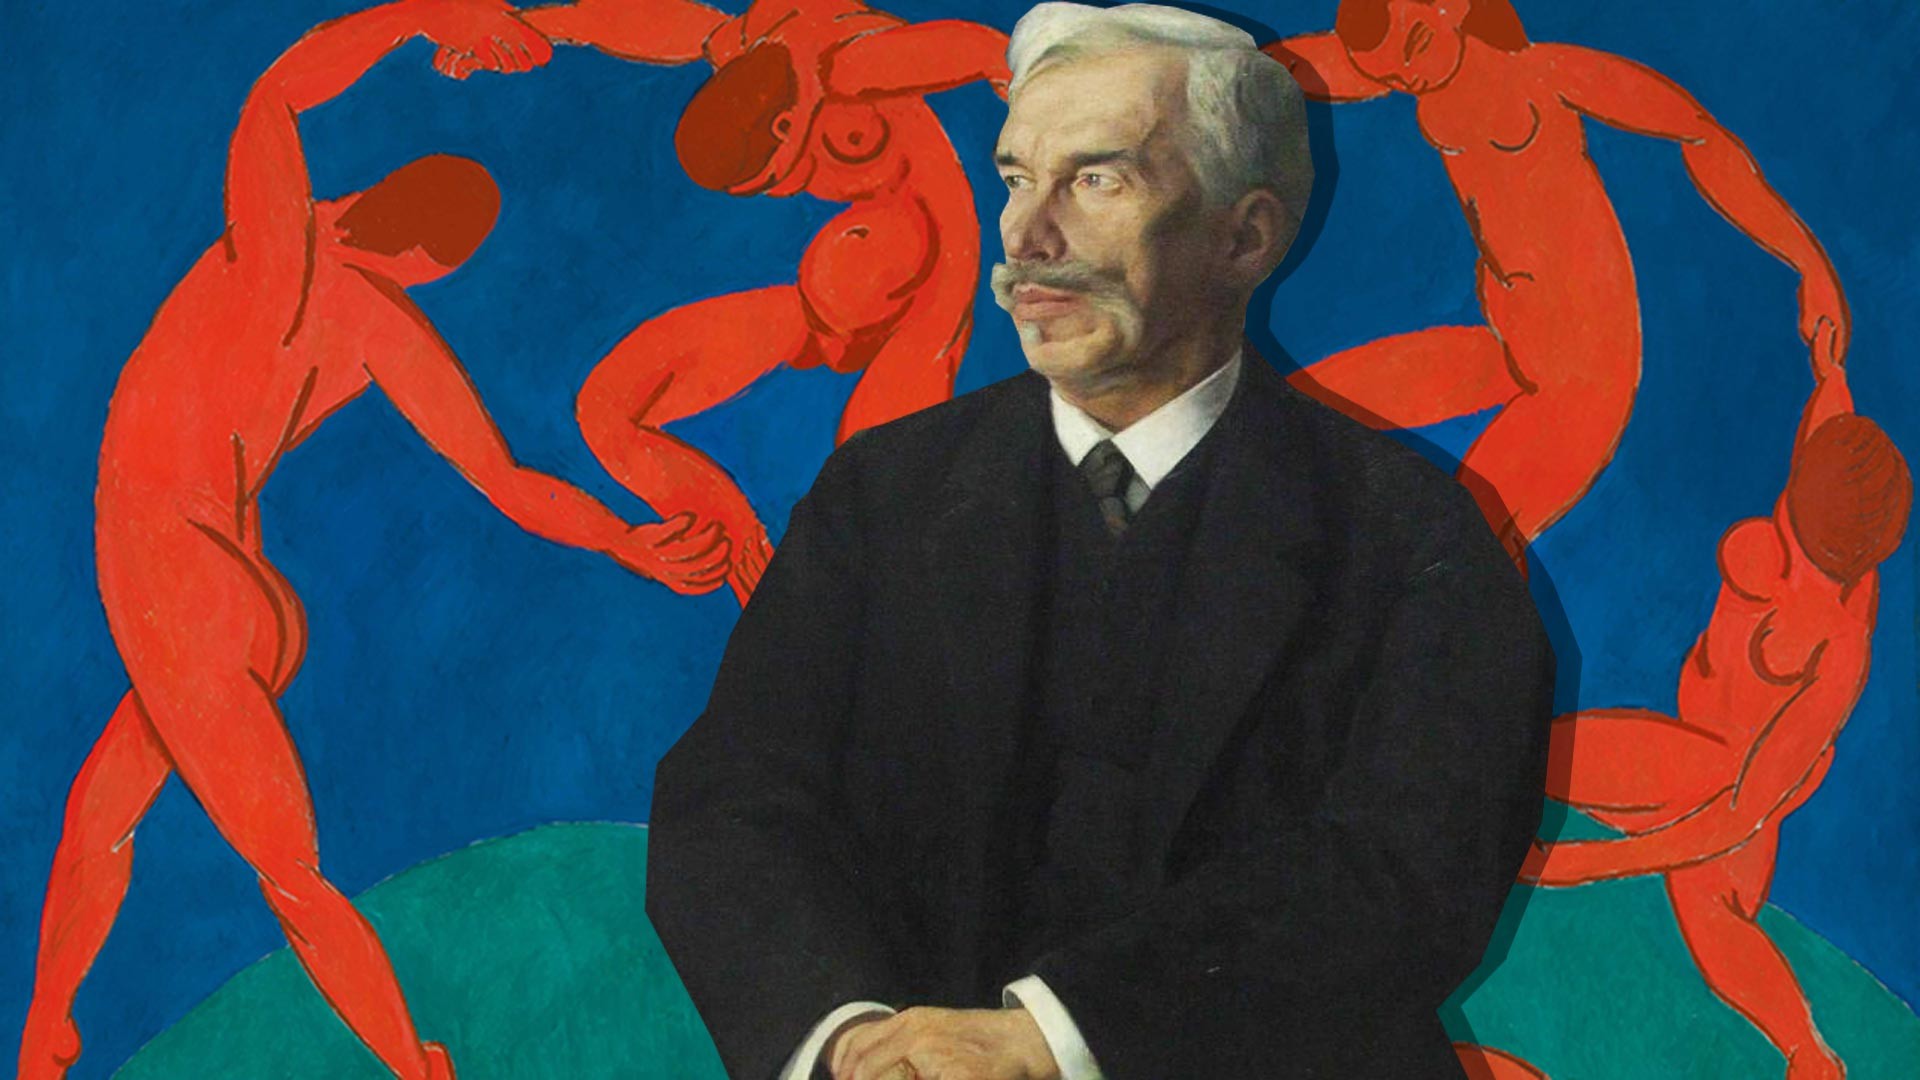 Portrait of Sergei Shchukin; 'Dance' by Henri Matisse from his collection on the background